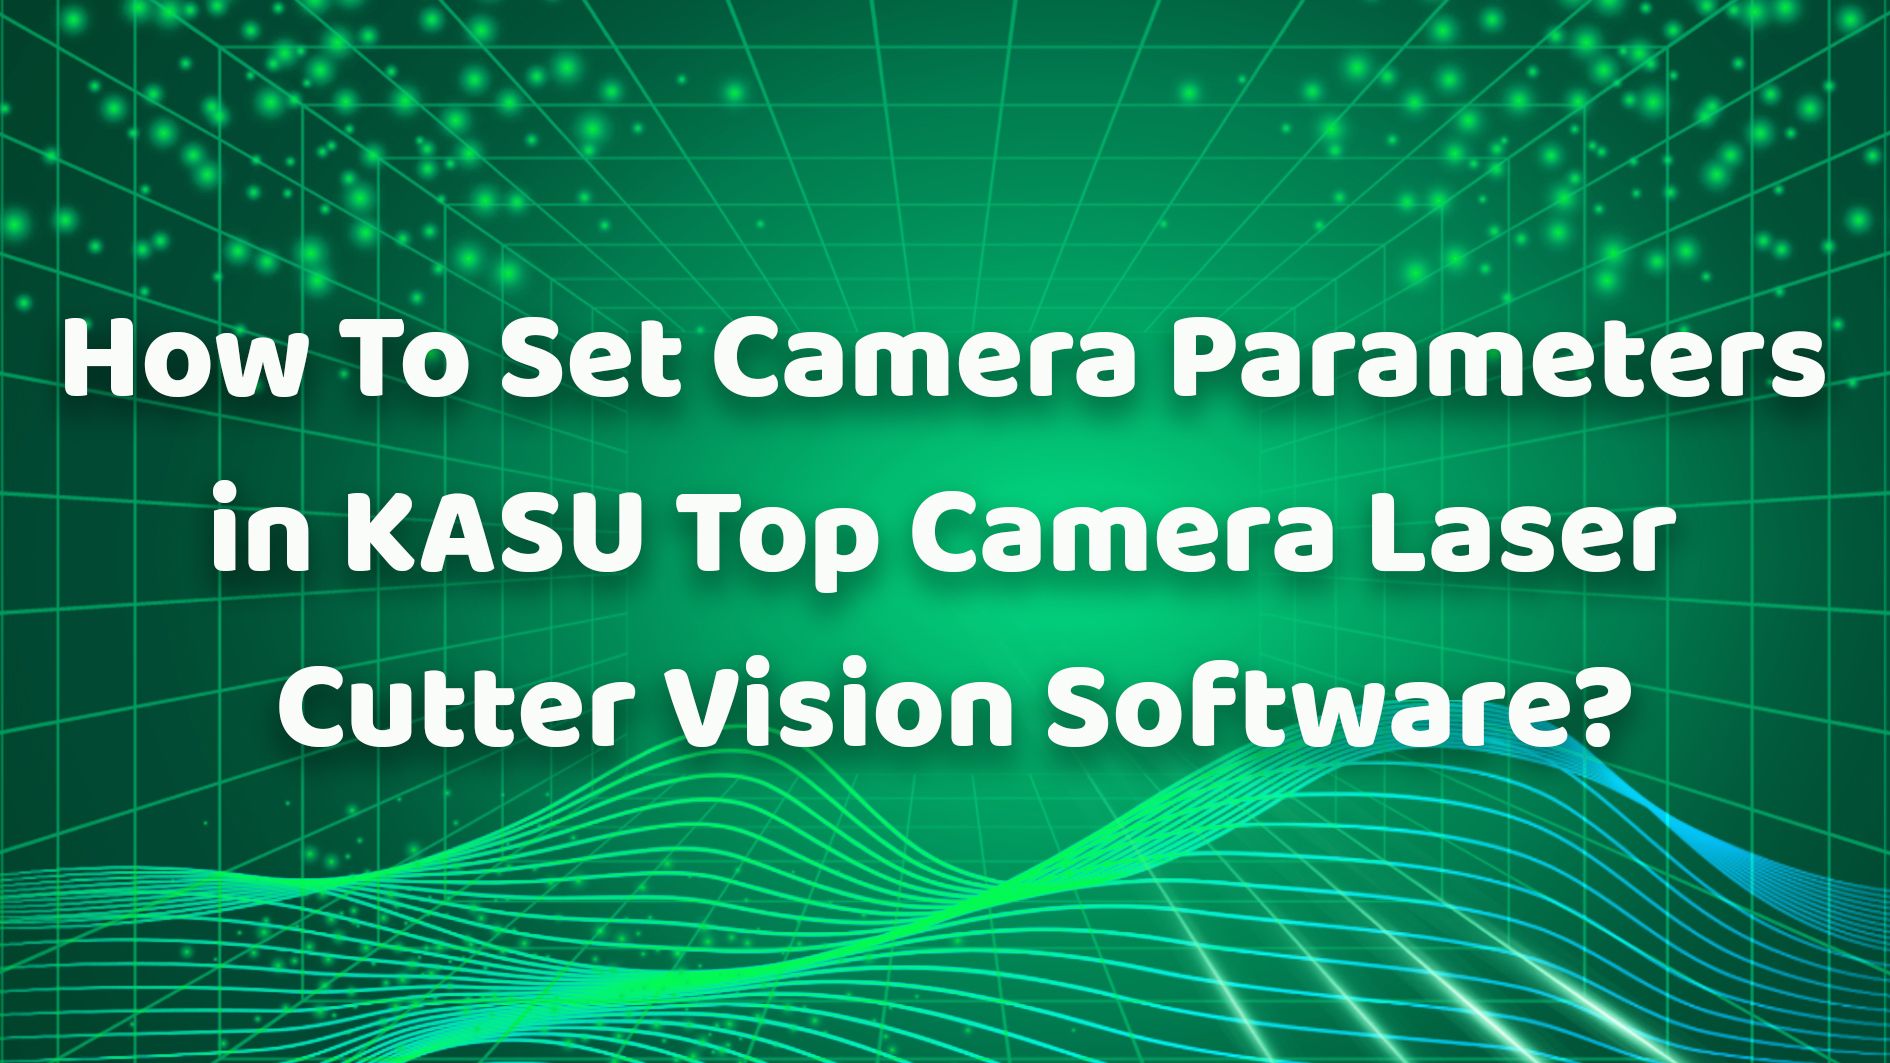 How To Set Camera Parameters in KASU Top Camera Laser Cutter Vision Software？